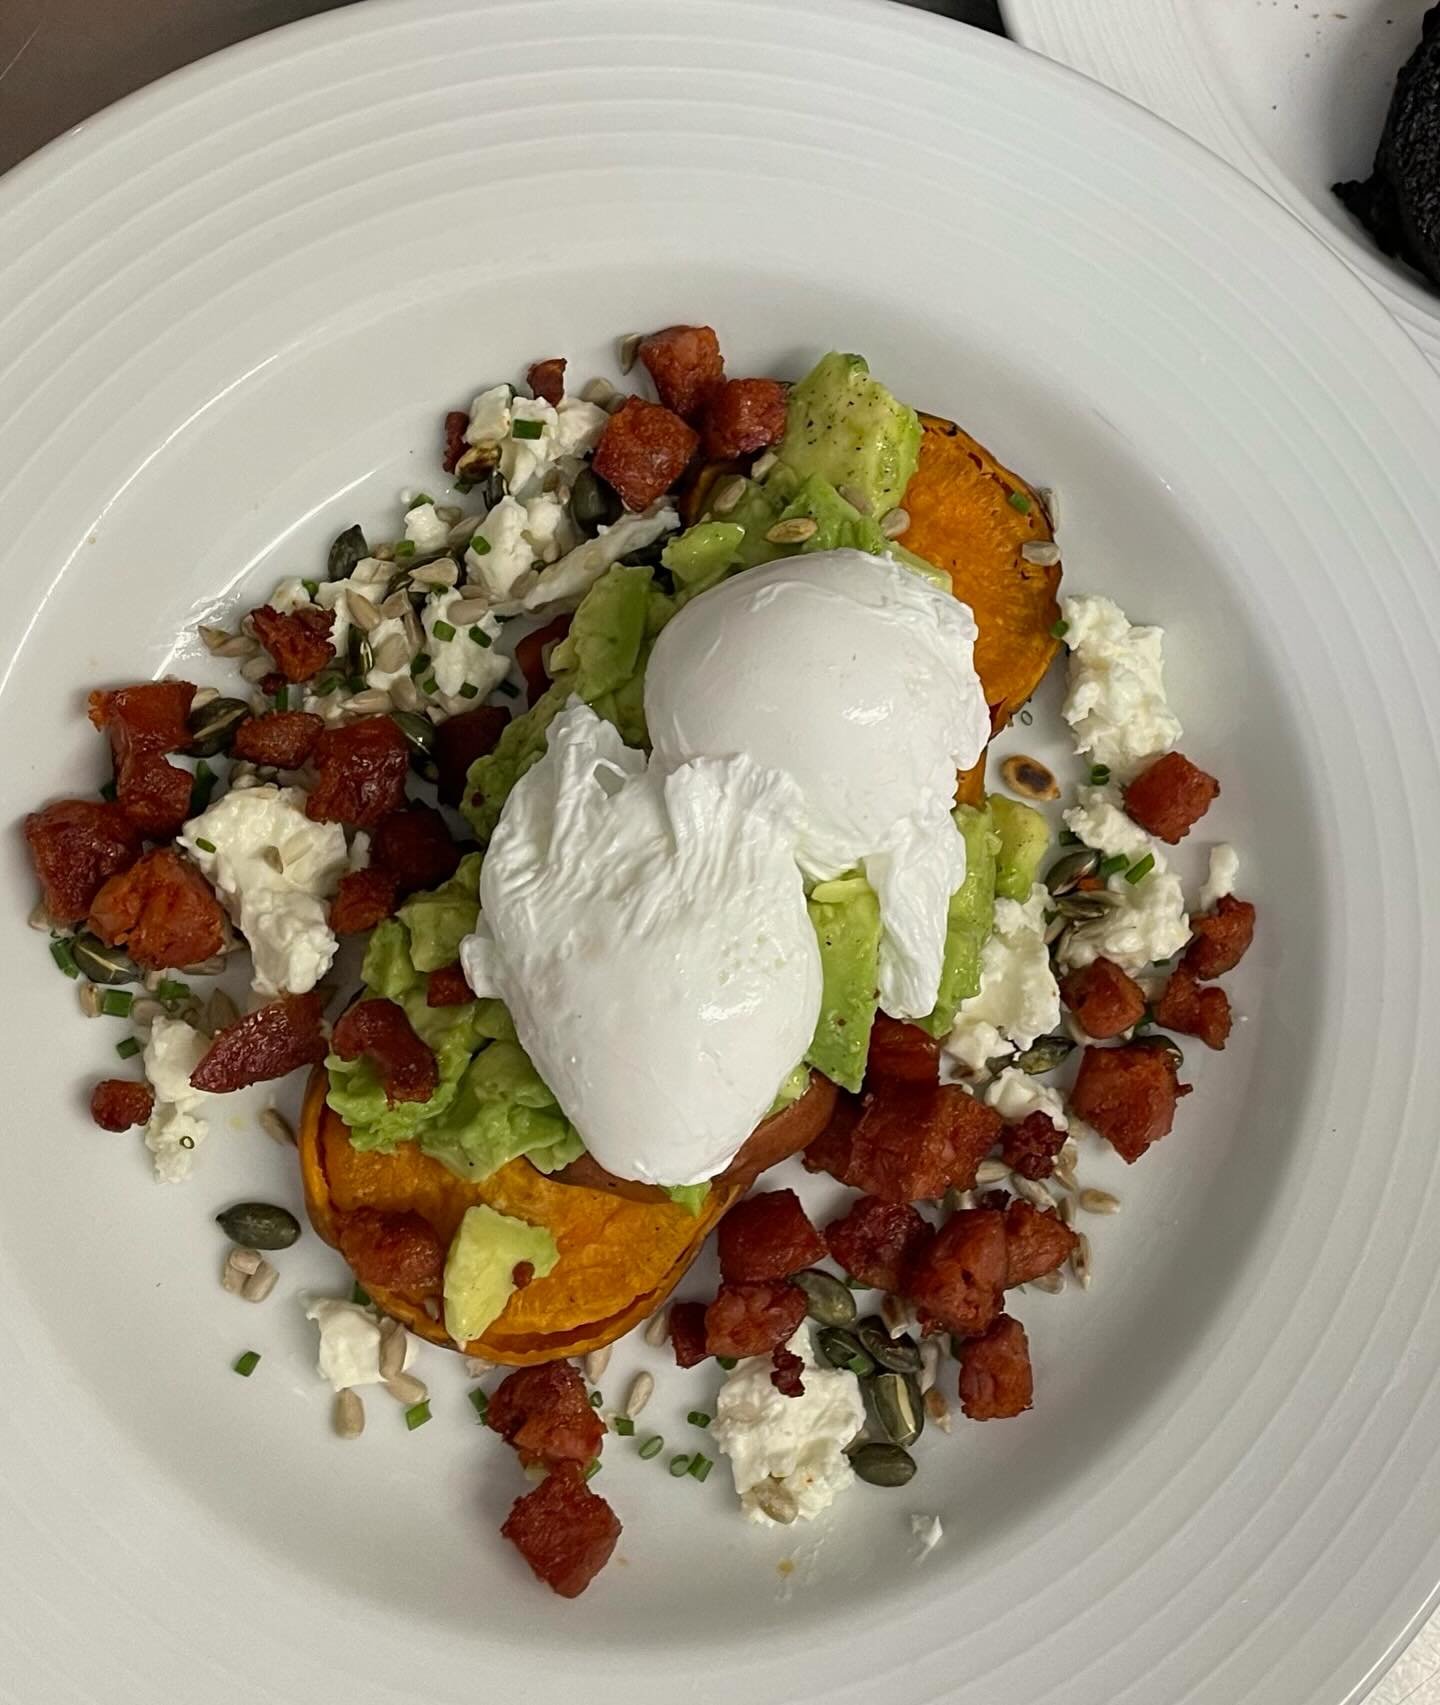 Perfectly poached free range organic eggs on sweet potato &lsquo;toast&rsquo; with avocado, chorizo, feta &amp; toasted seeds. A good start to the day! 🌞